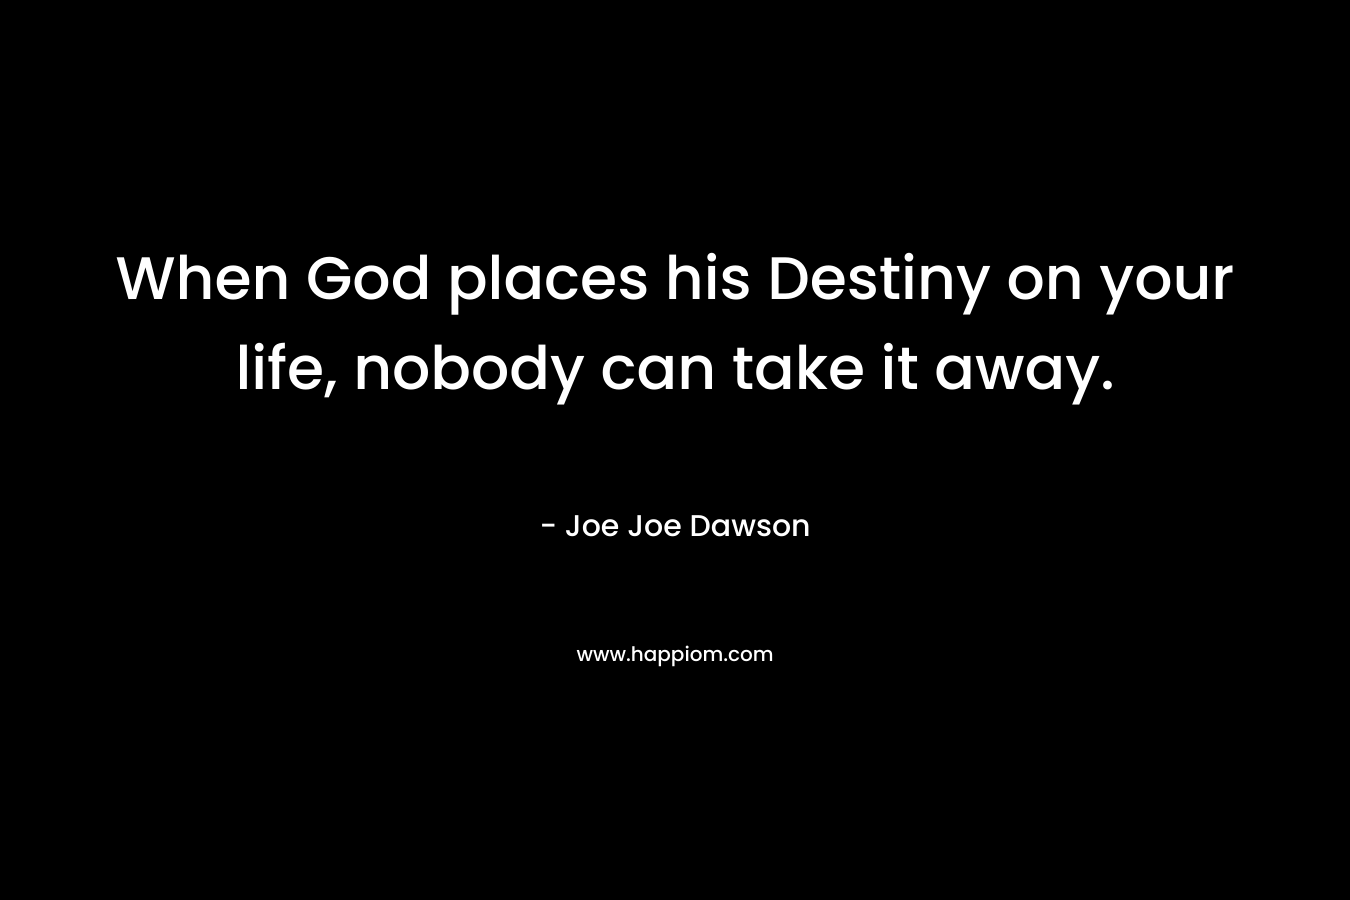 When God places his Destiny on your life, nobody can take it away.